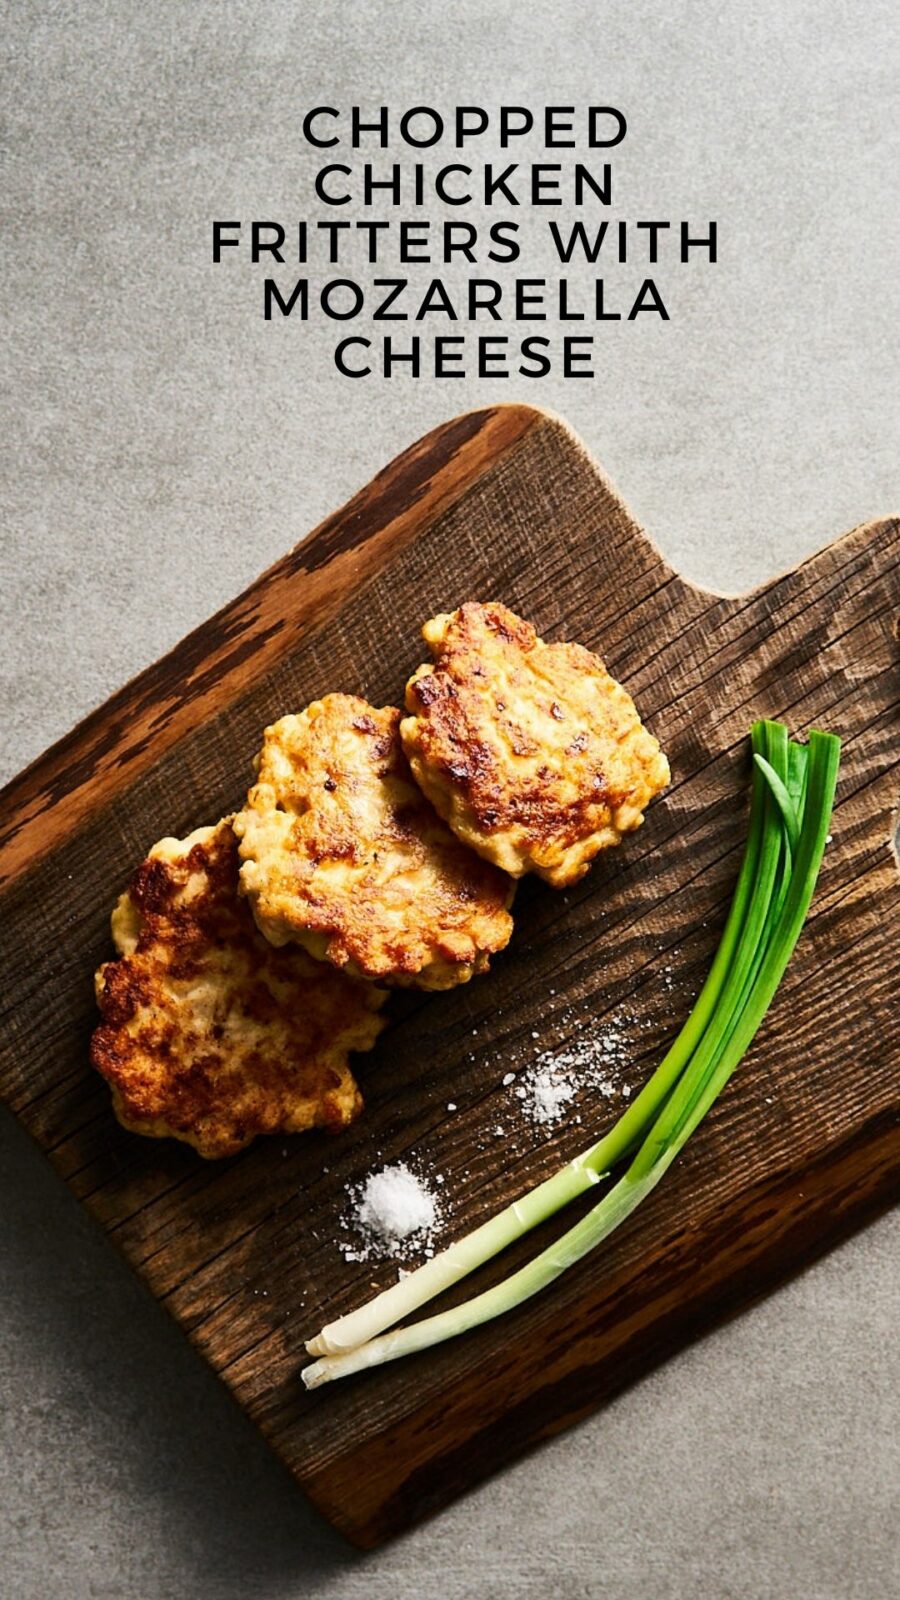 Chopped chicken fritters with mozarella cheese by bayevskitchen.com
